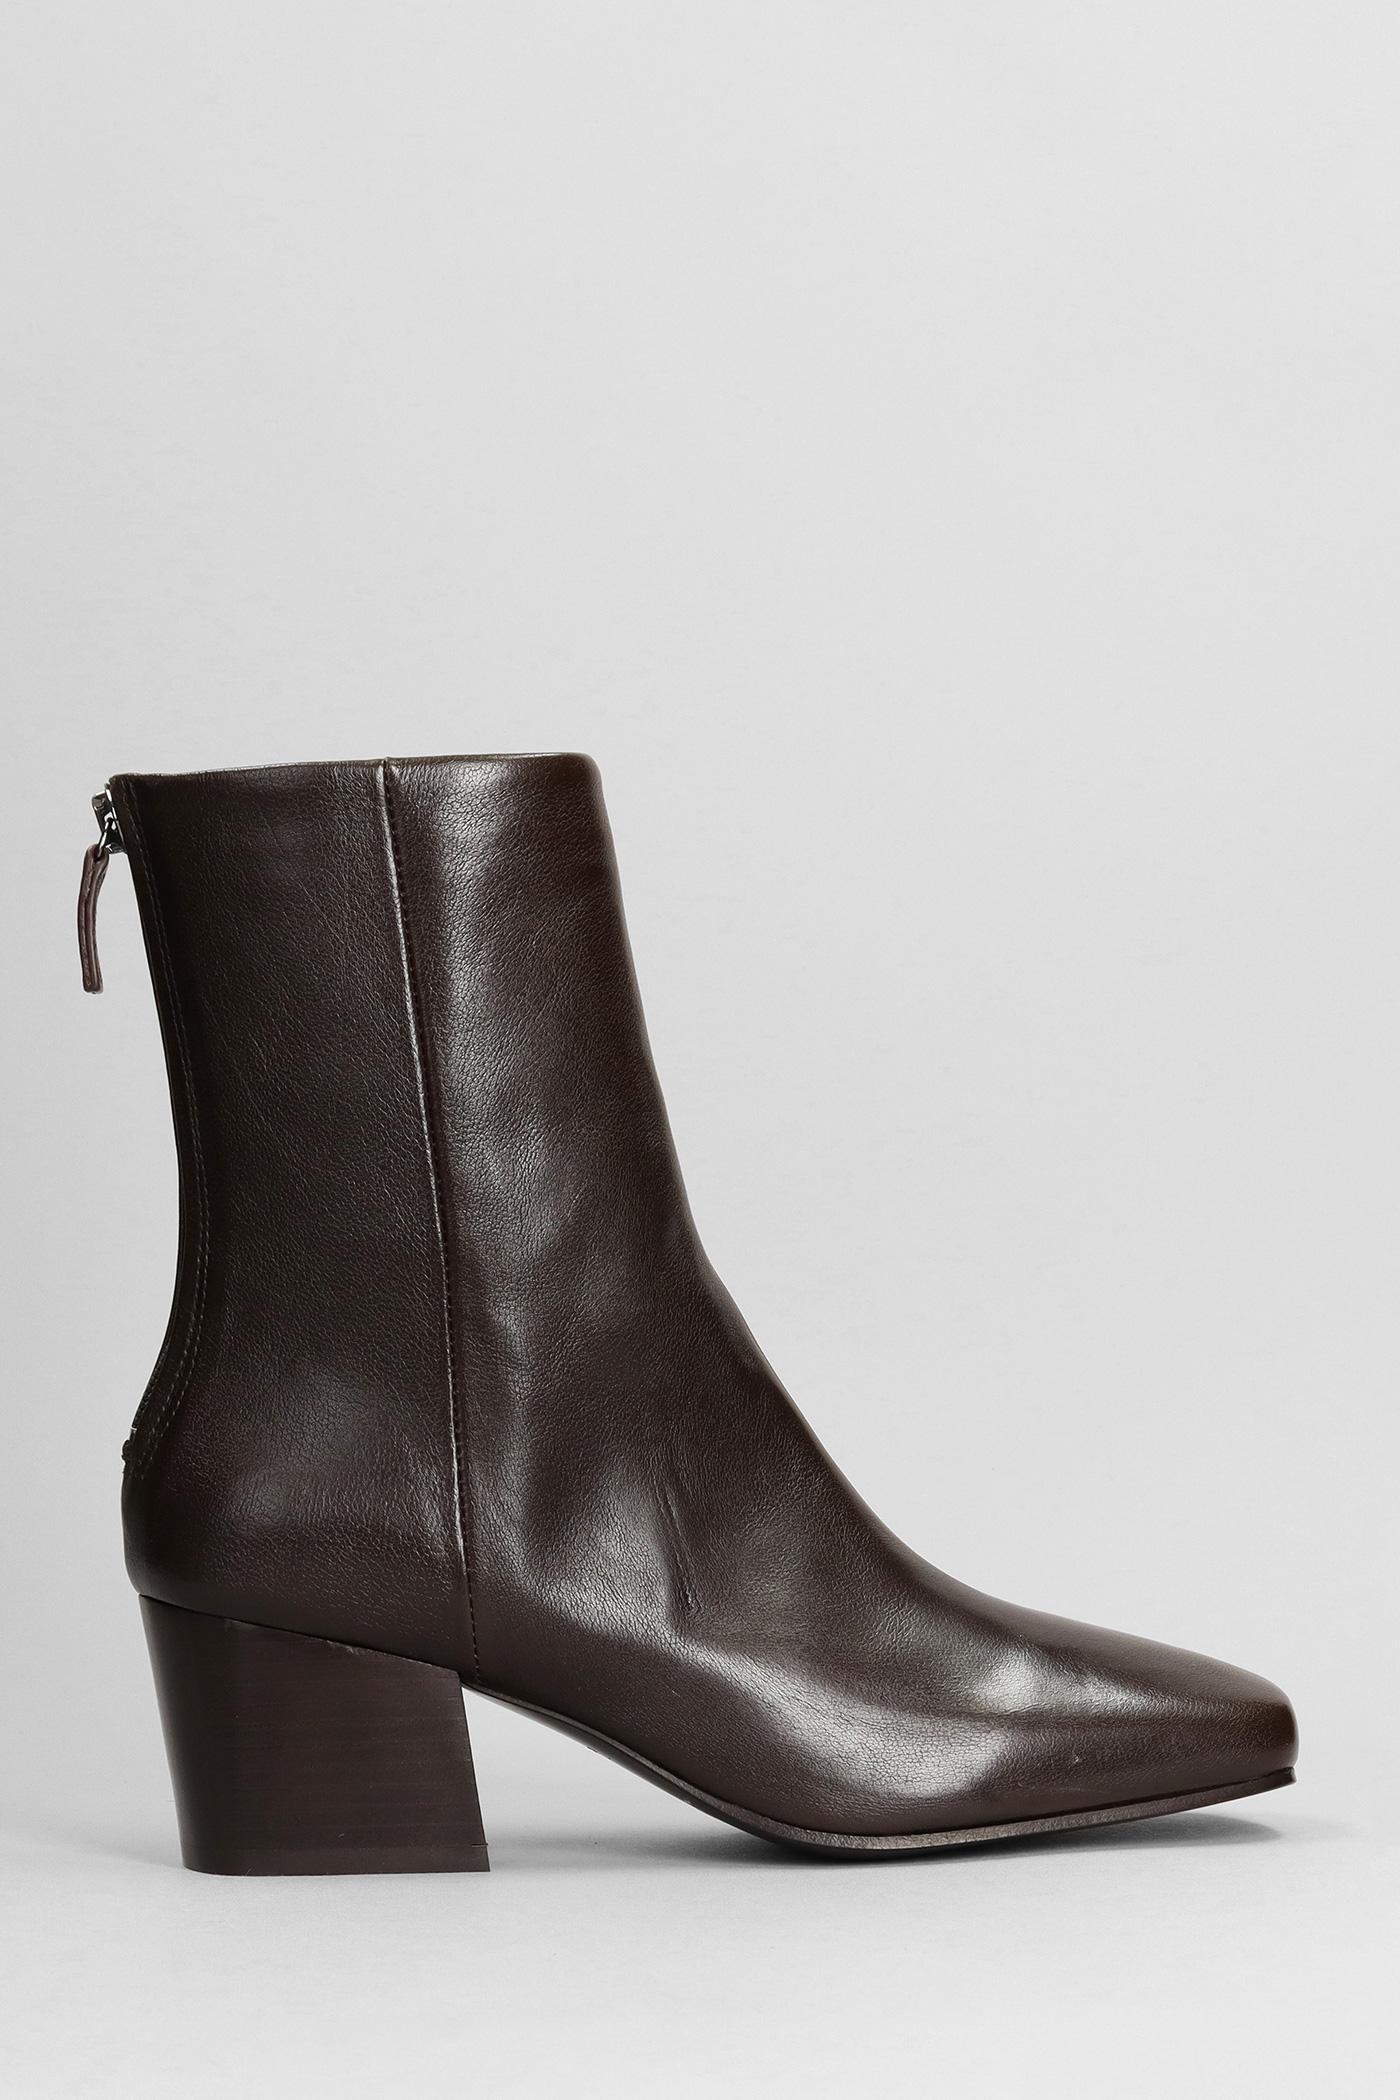 Lemaire High Heels Ankle Boots In Brown Leather | Lyst